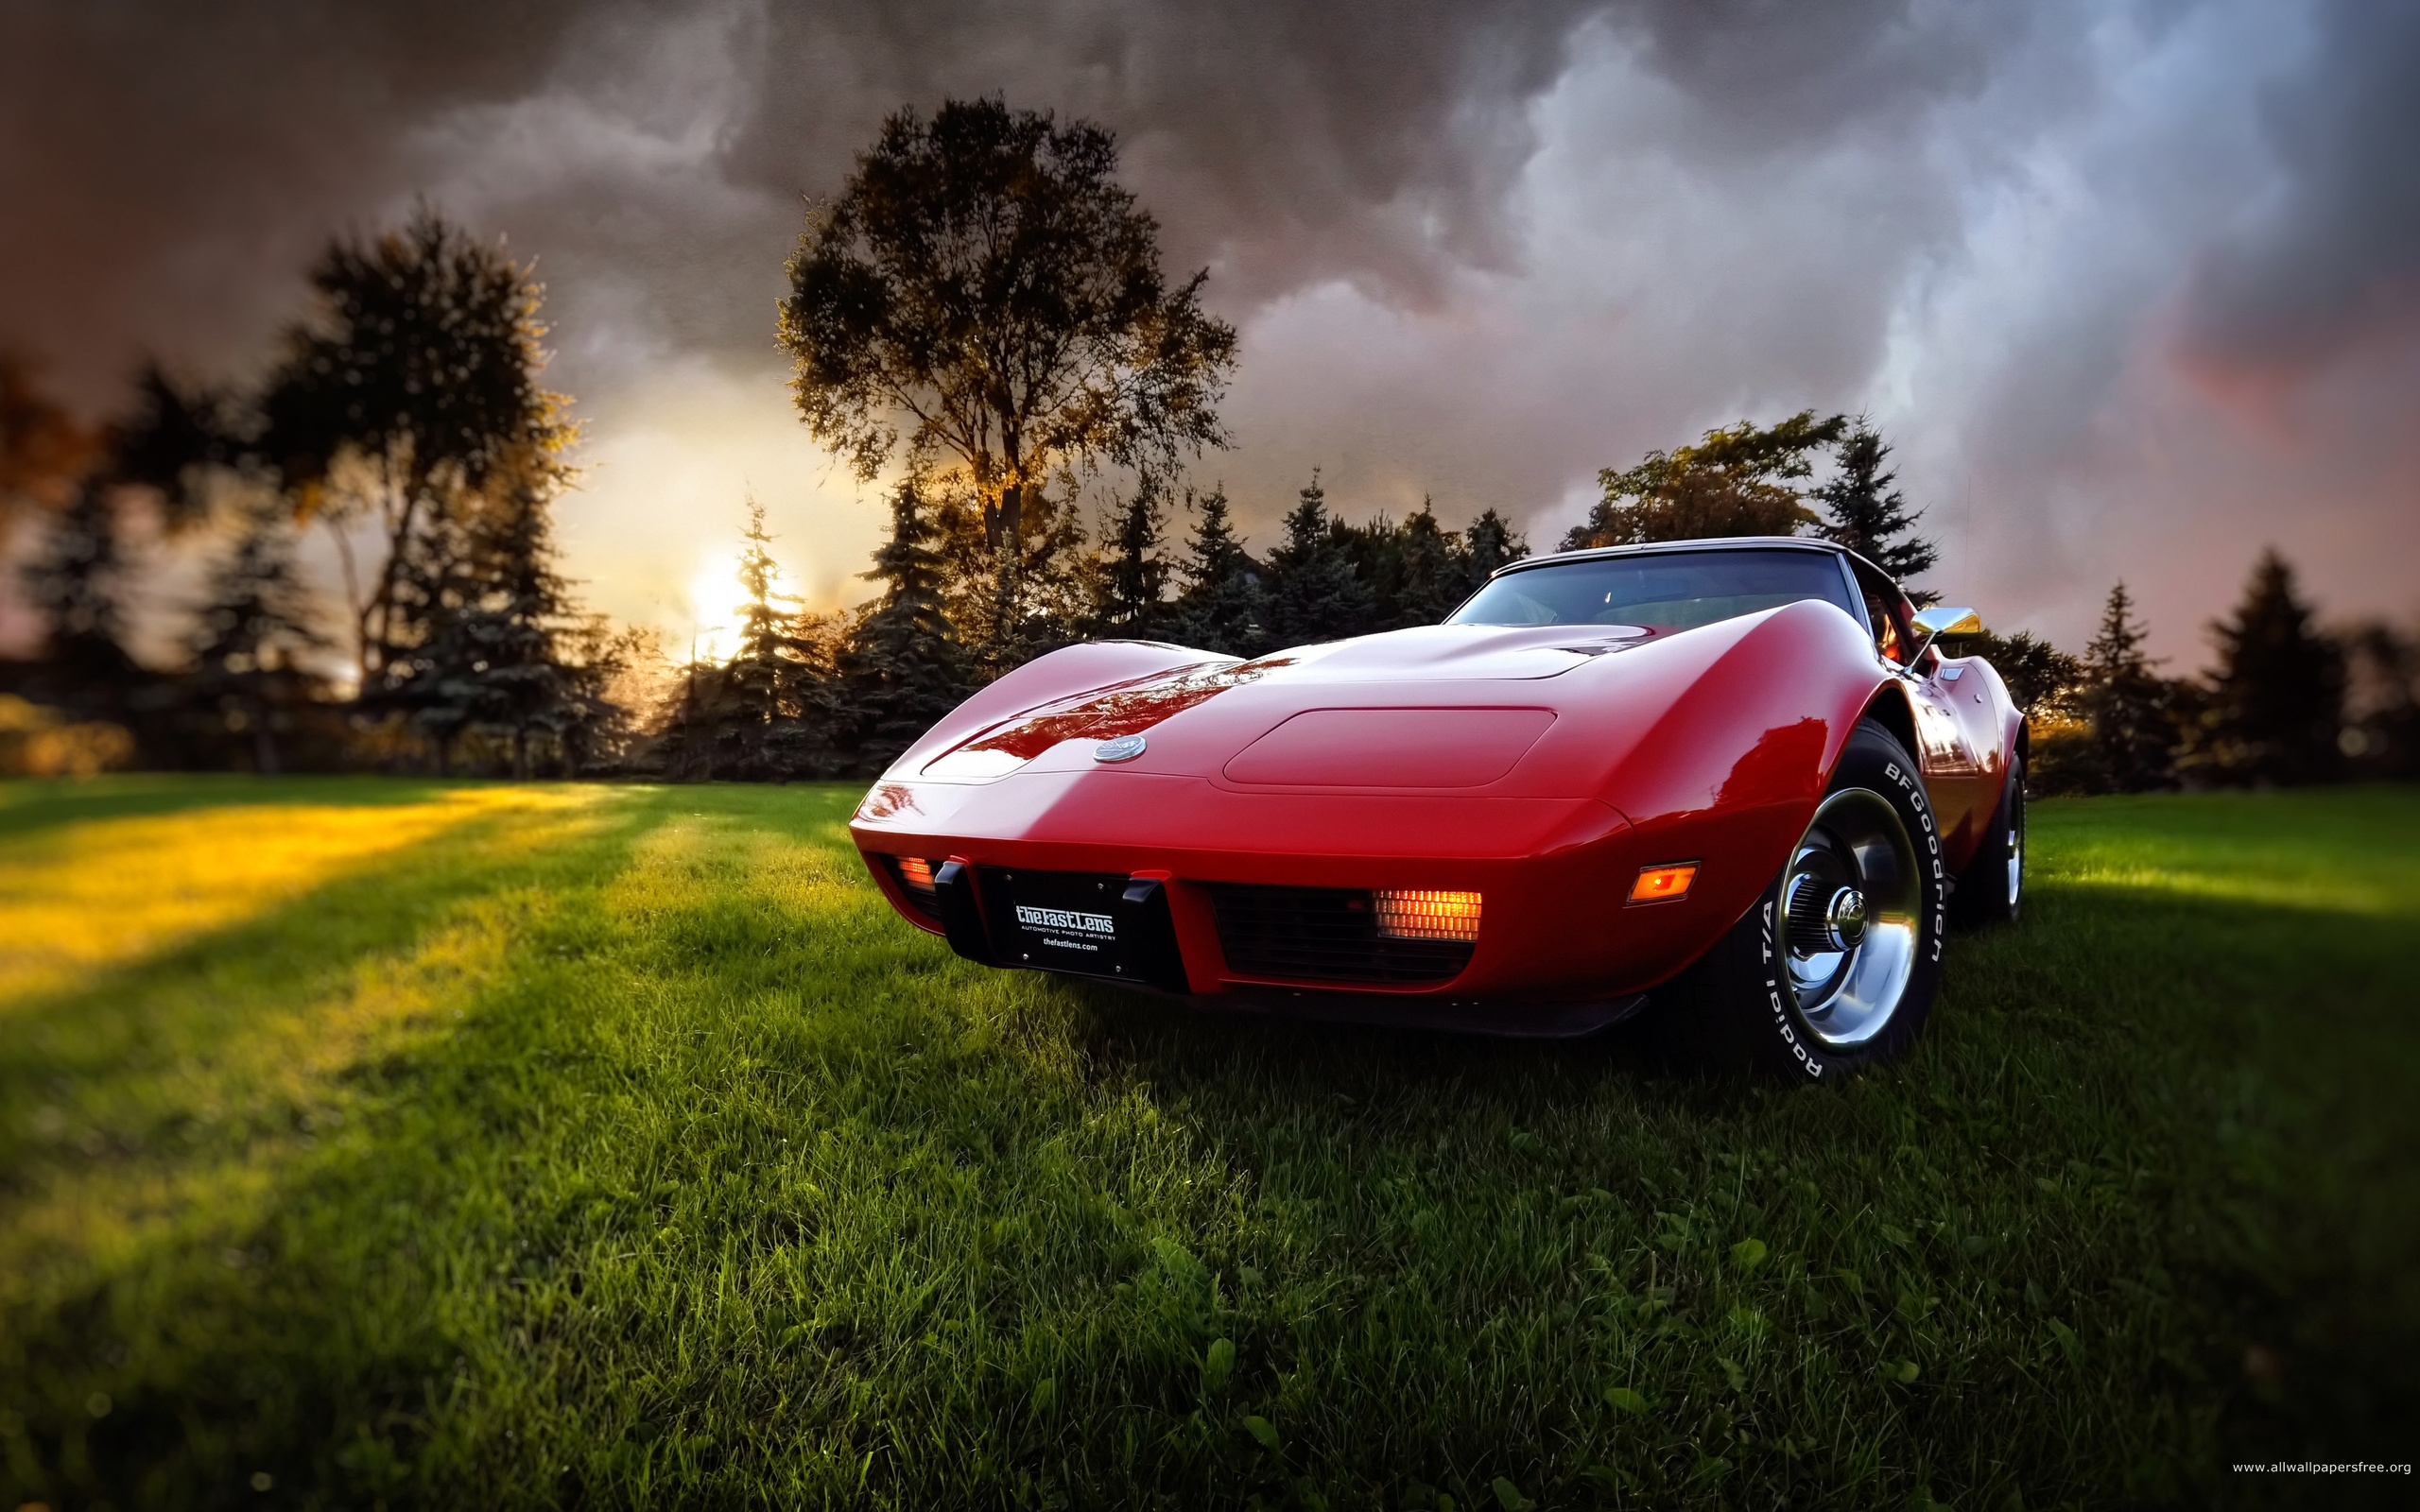 General 2560x1600 car red cars trees vehicle Chevrolet Corvette American cars pop-up headlights